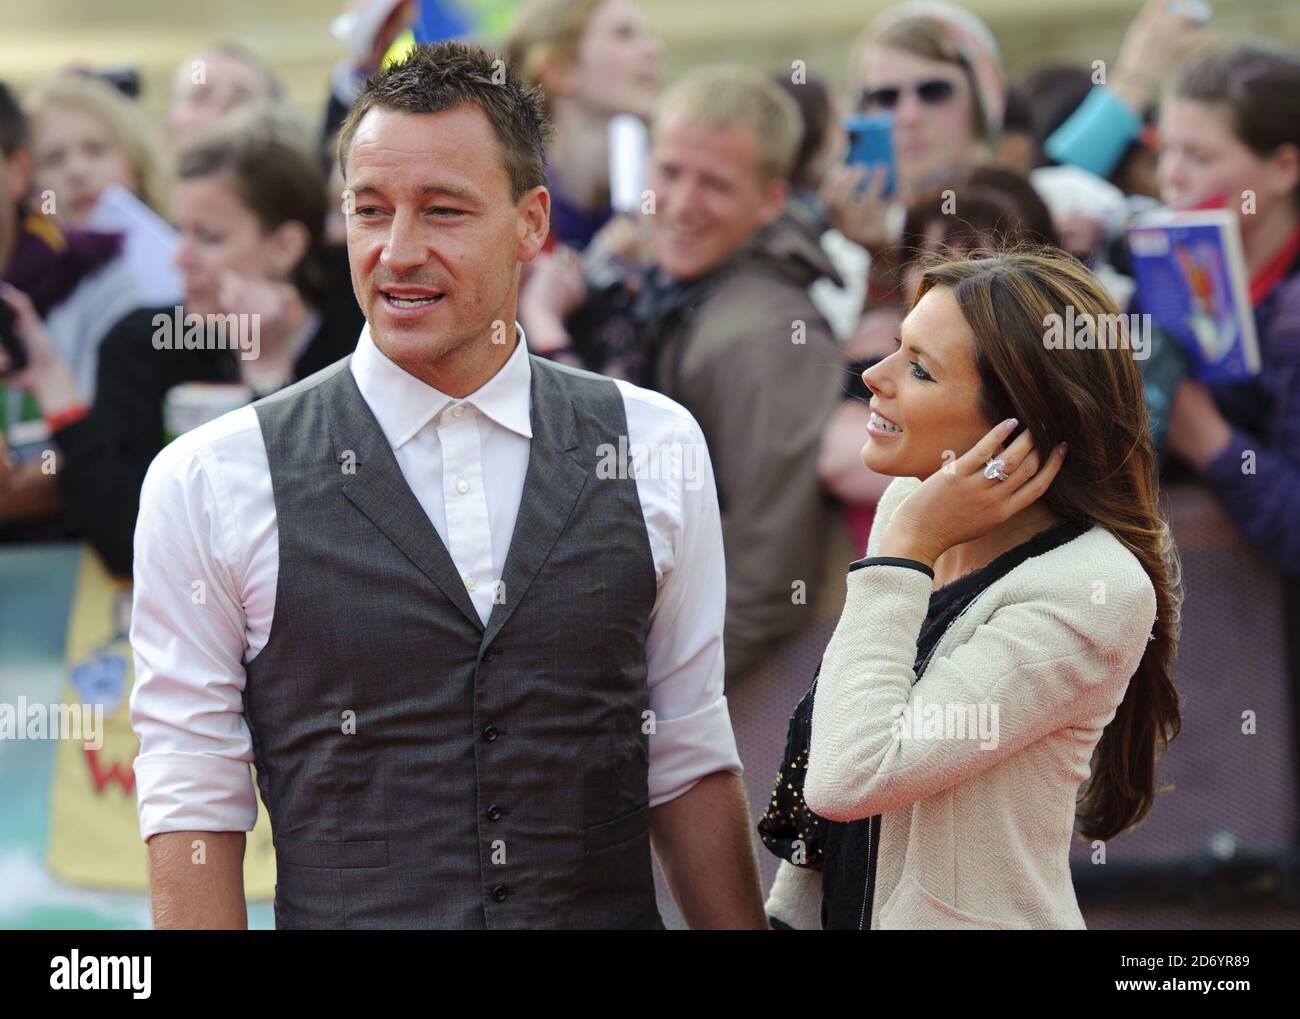 John Terry and Toni Poole at the world premiere of Harry Potter and the Deathly Hallows Part 2, in Trafalgar Square in central London. Stock Photo